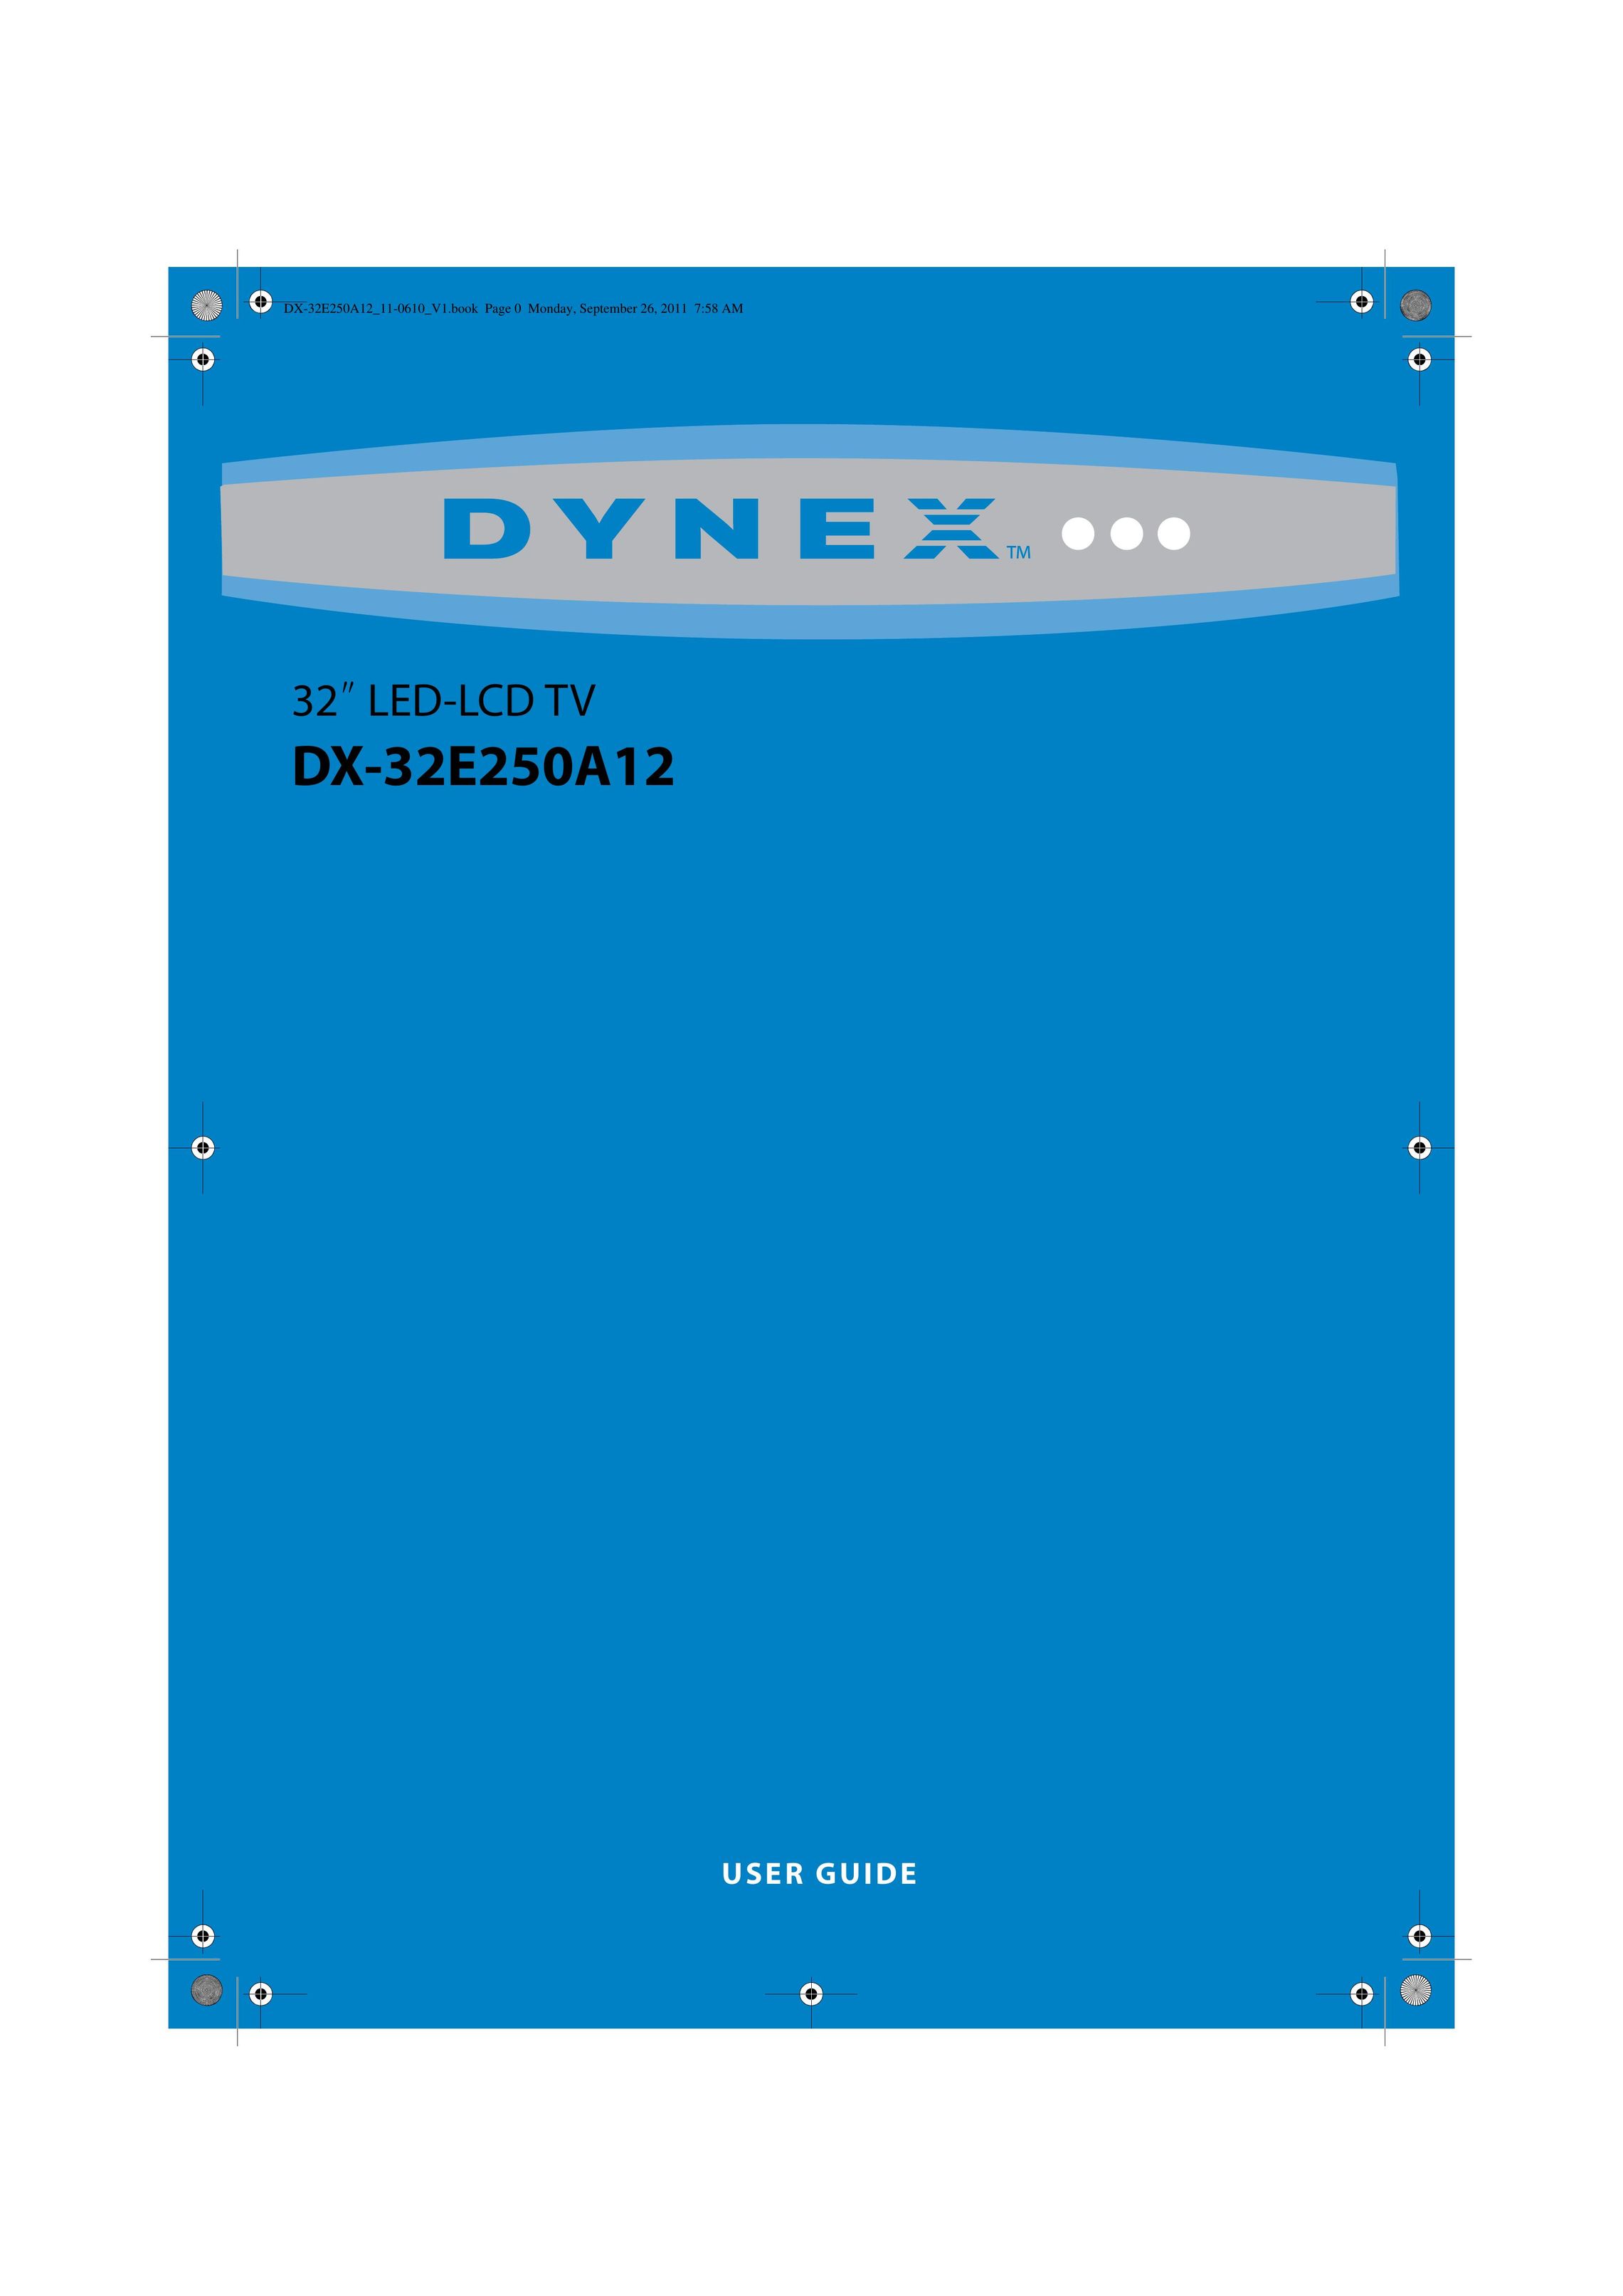 Dynex DX-32E250A12 Flat Panel Television User Manual